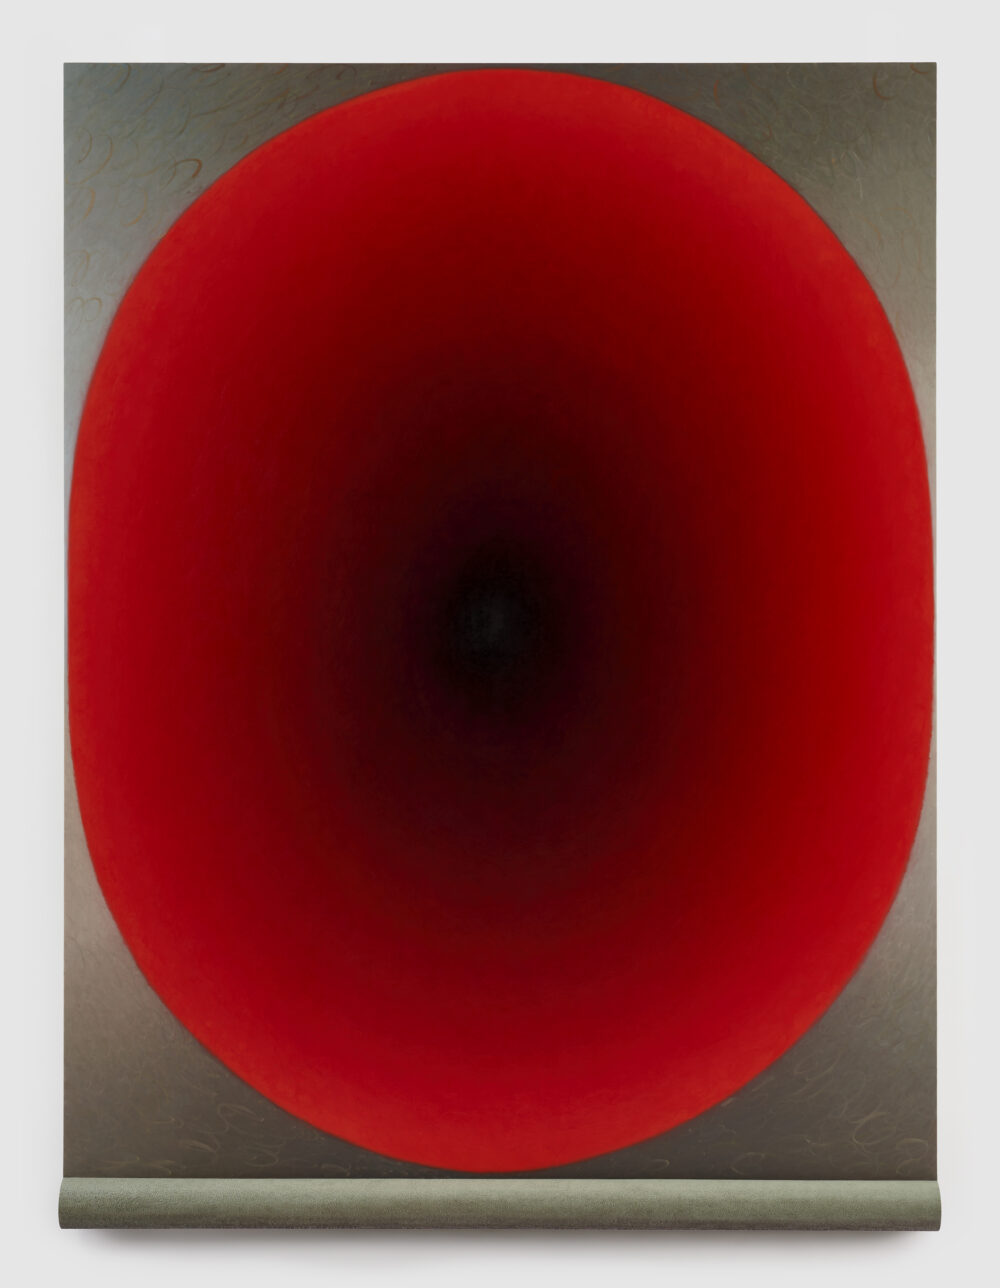 A red oval shape on a rectangular canvas